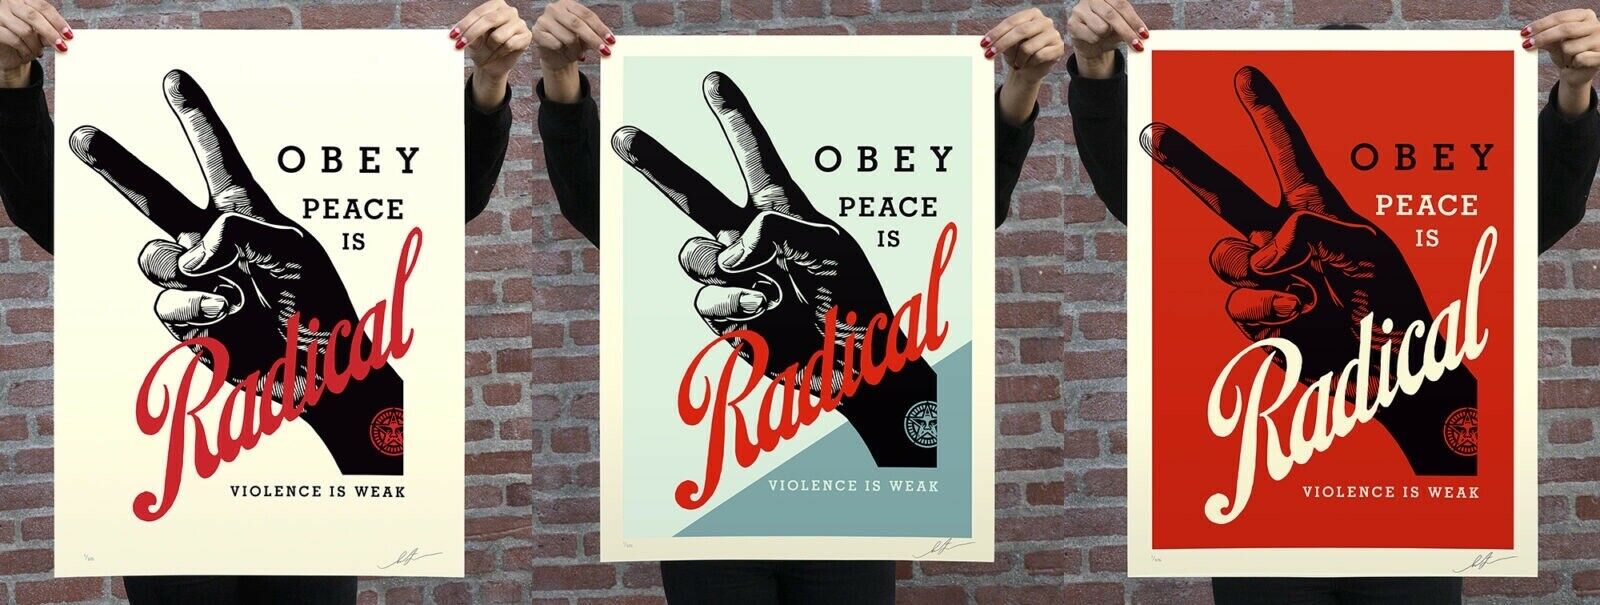 Shepard Fairey - Obey Radical Peace - Set Edition